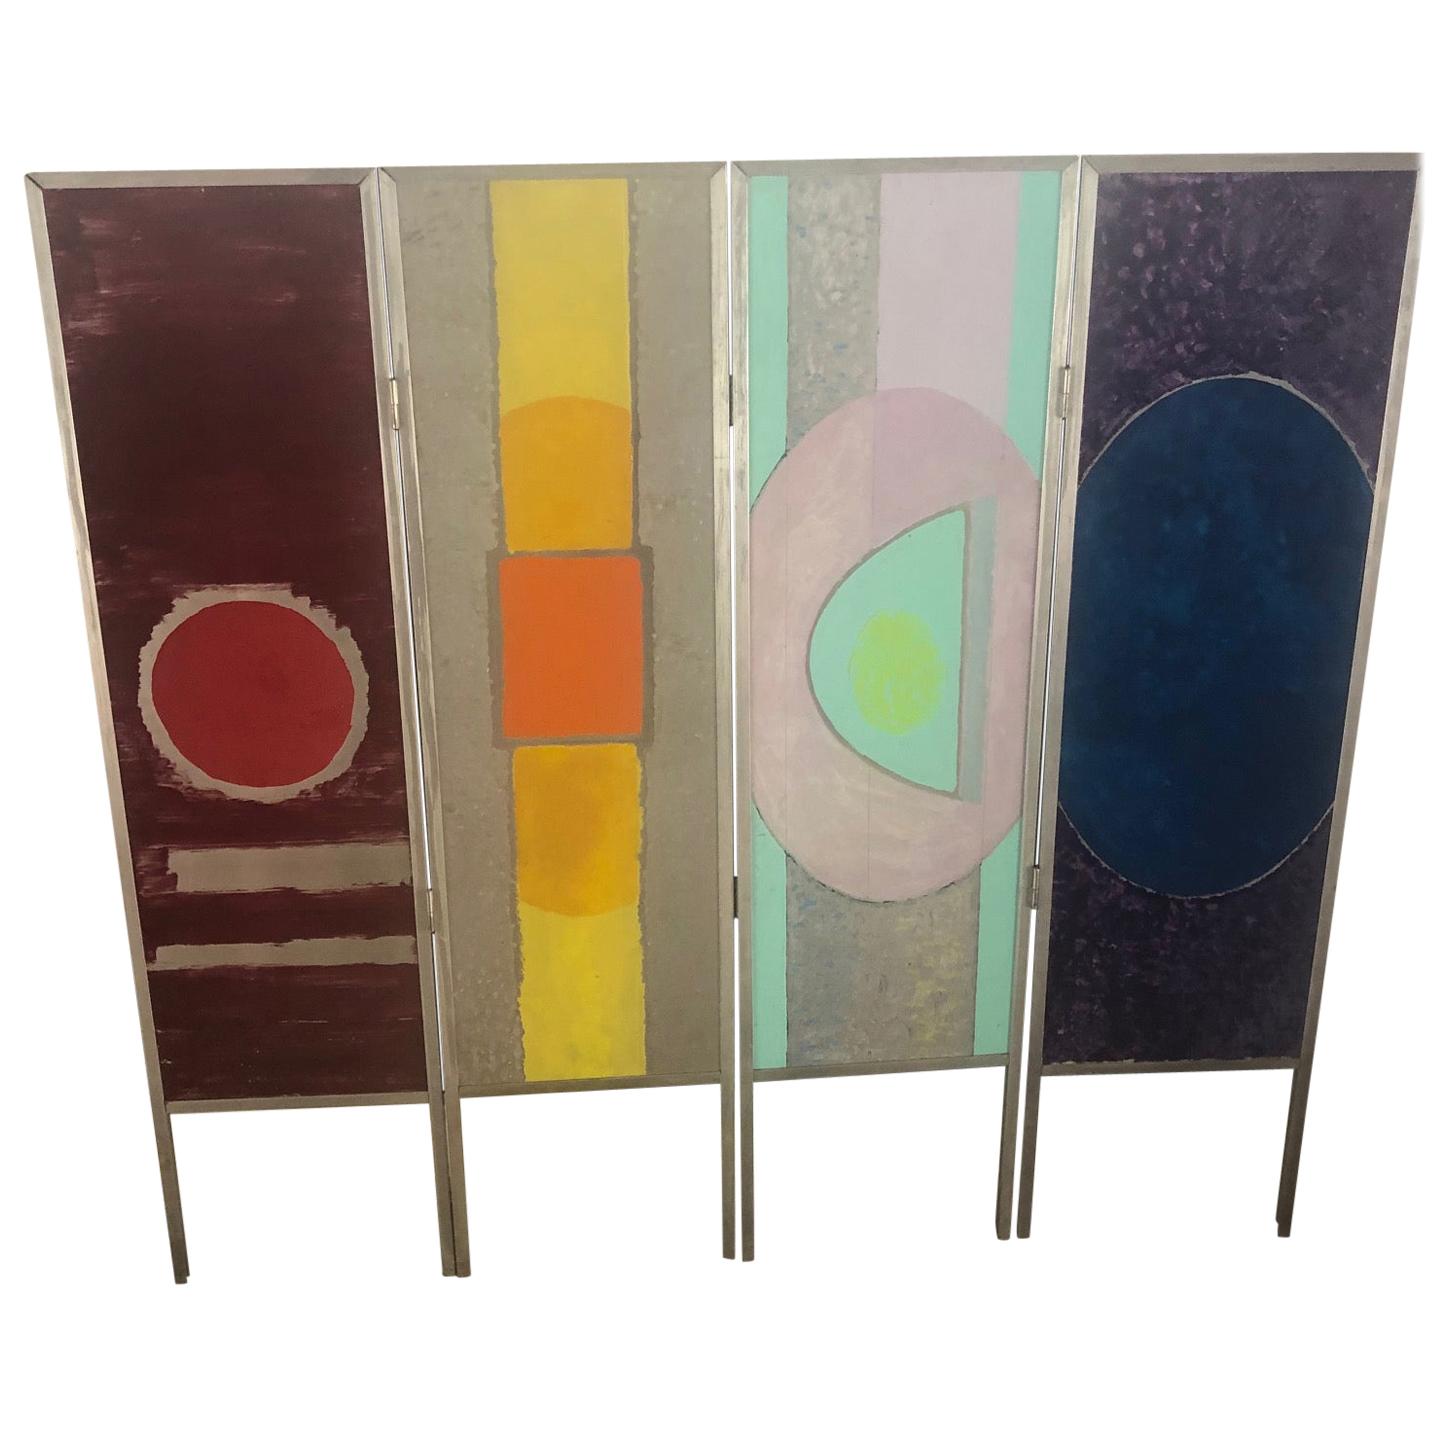 Folding Screen in Metal Painted and Signed “Le Songe” 'the Dream' Four Panels